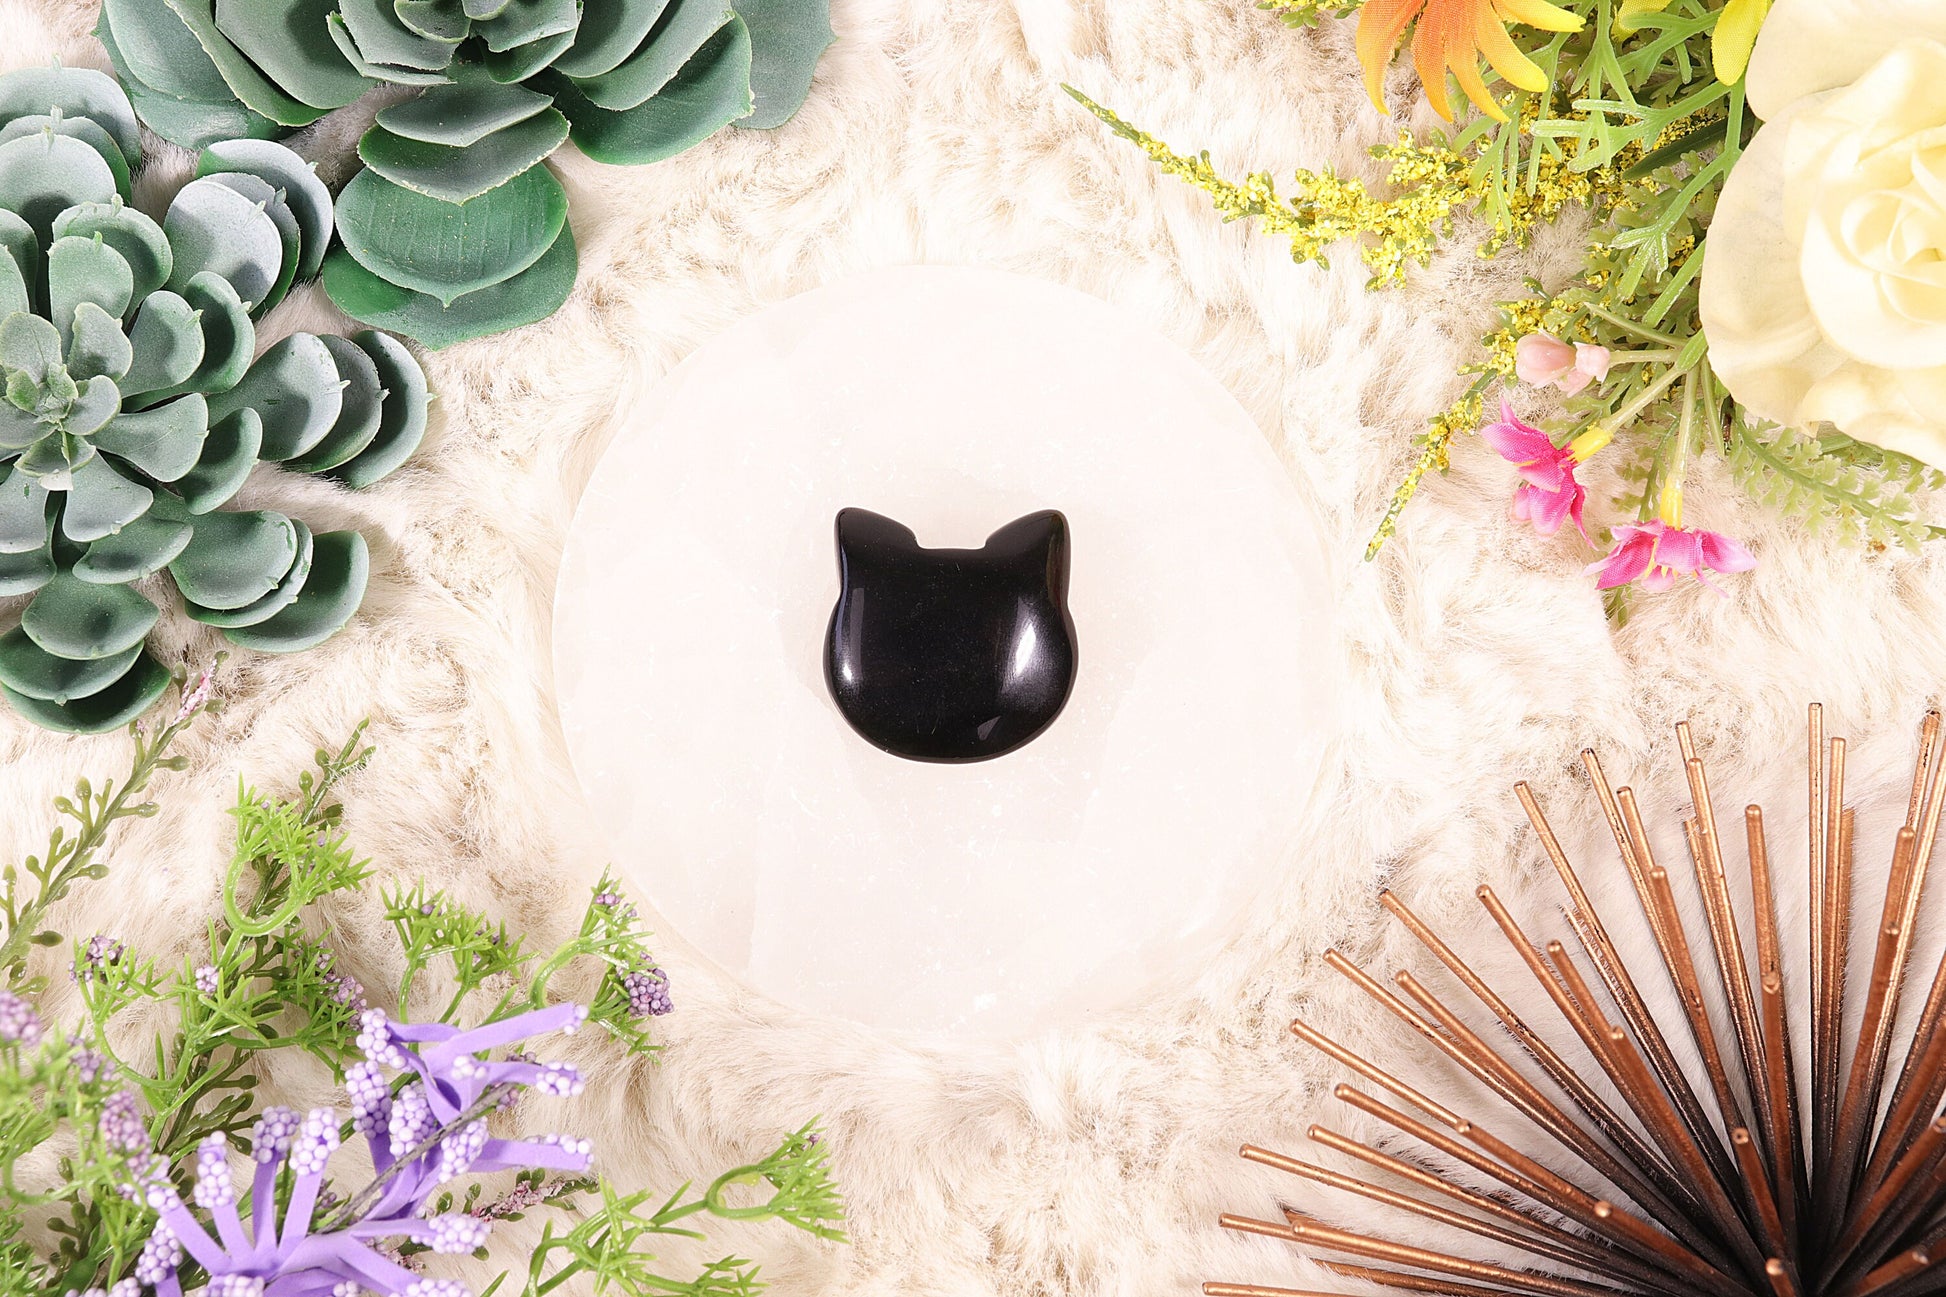 Adorable Crystal Carved Kitty Face, Black Obsidian Gemstone, Protecting Crystal, Animal Statue - SET OF ONE